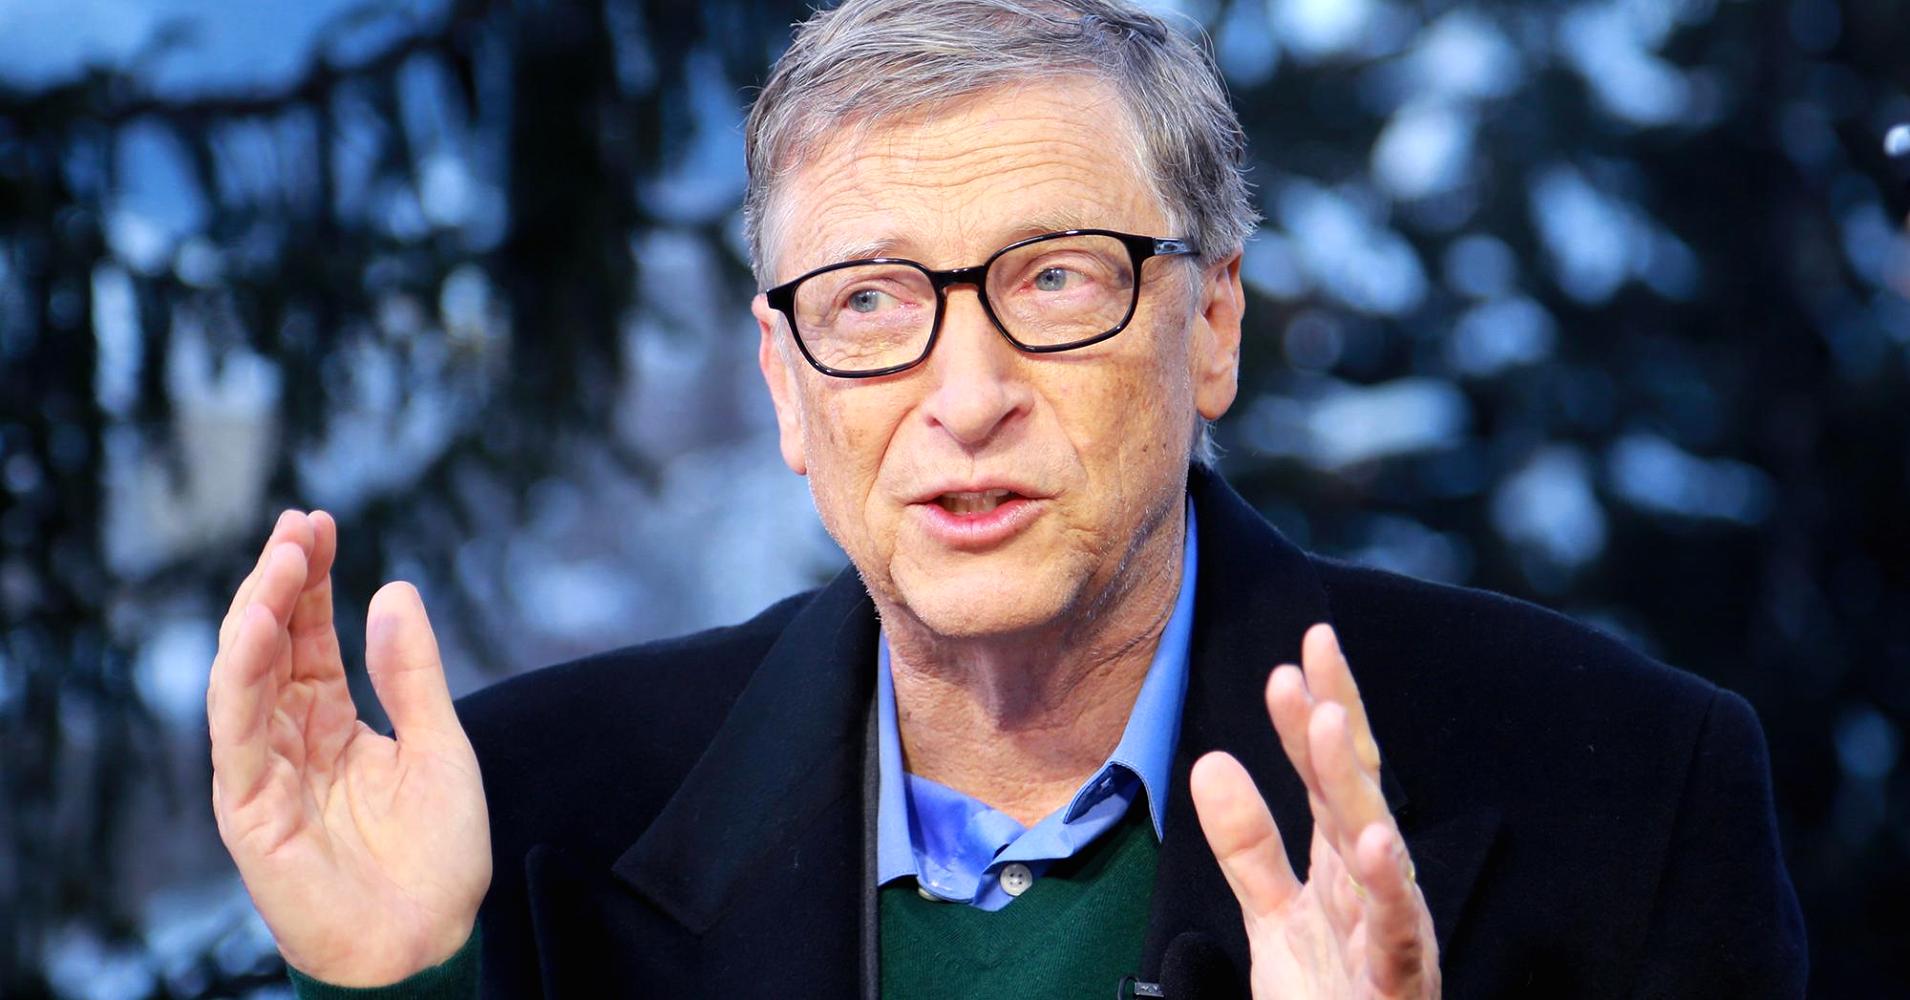 Bill Gates says he would short Bitcoin if he could find an easy way to do so